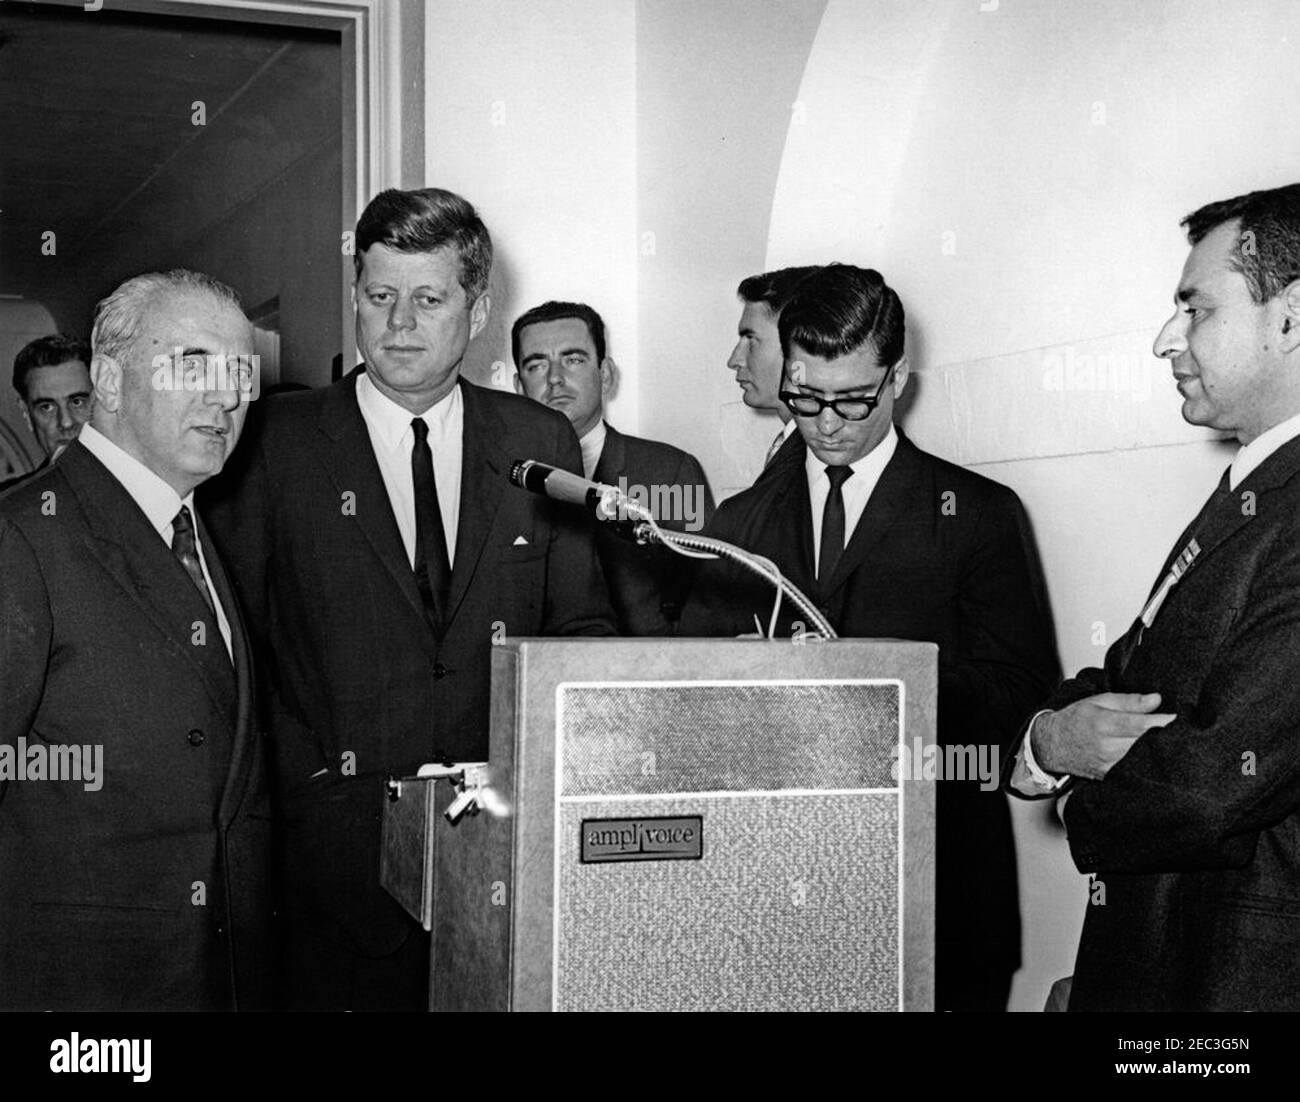 Visit of members of the u0022Incontro Club,u0022 (Marzotto family enterprises) 4:15PM. President John F. Kennedy shares the lectern with Ambassador of Italy, Sergio Fenoaltea, during an address to members of the u0022Incontro Club,u0022 part of the Marzotto family enterprises of Valdagno, Italy. In the foreground (L-R): Ambassador Fenoaltea; President Kennedy; US State Department interpreter, Neil Seidenman; and Count Giannino Marzotto. In the background (L-R): unidentified; Assistant Press Secretary, Malcolm Kilduff, Jr.; and White House Secret Service agent, Toby Chandler. West Wing Colo Stock Photo